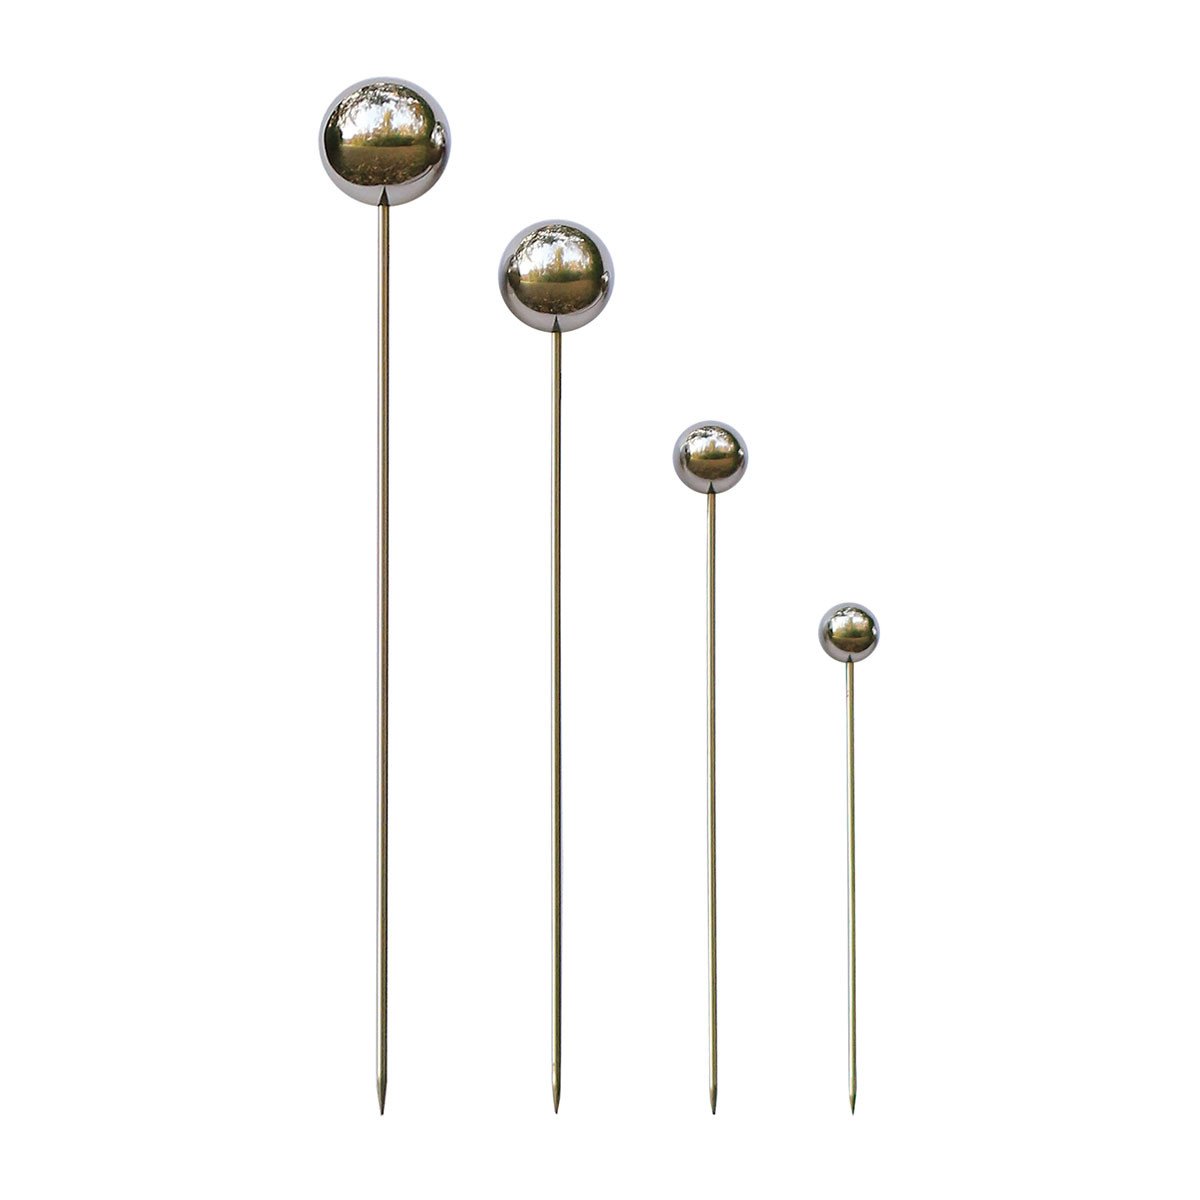 Large Stainless Steel Garden Lollipop Stakes, Rome #717